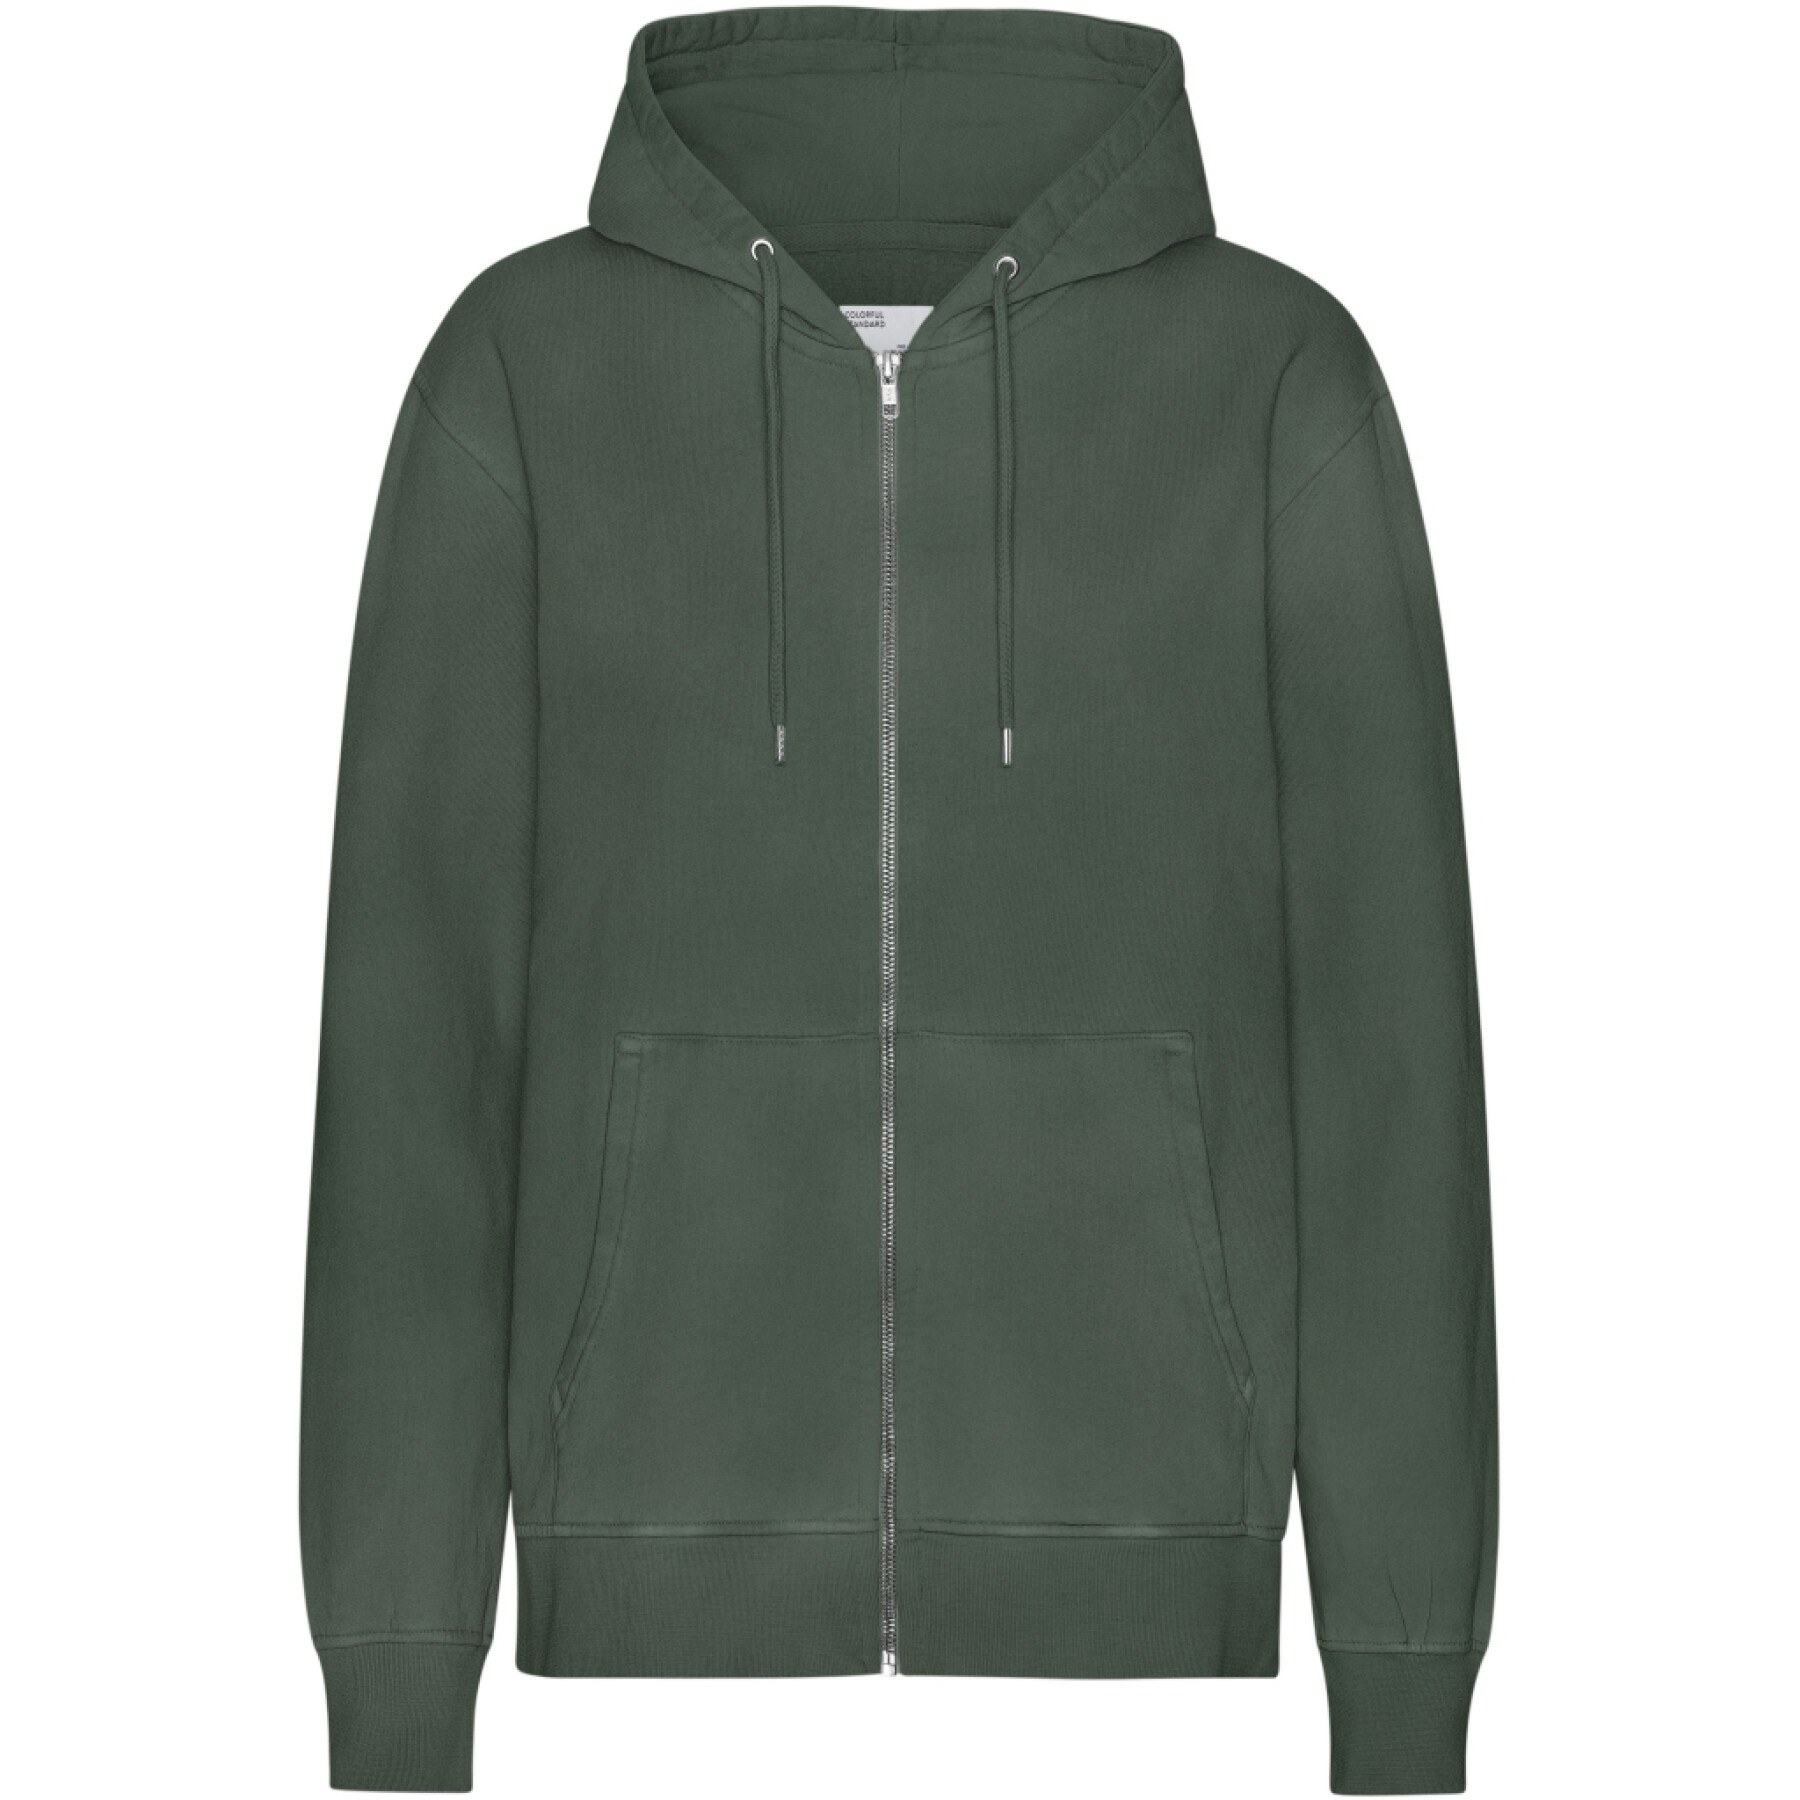 Zip-up hoodie Colorful Standard Classic Organic Midnight Forest